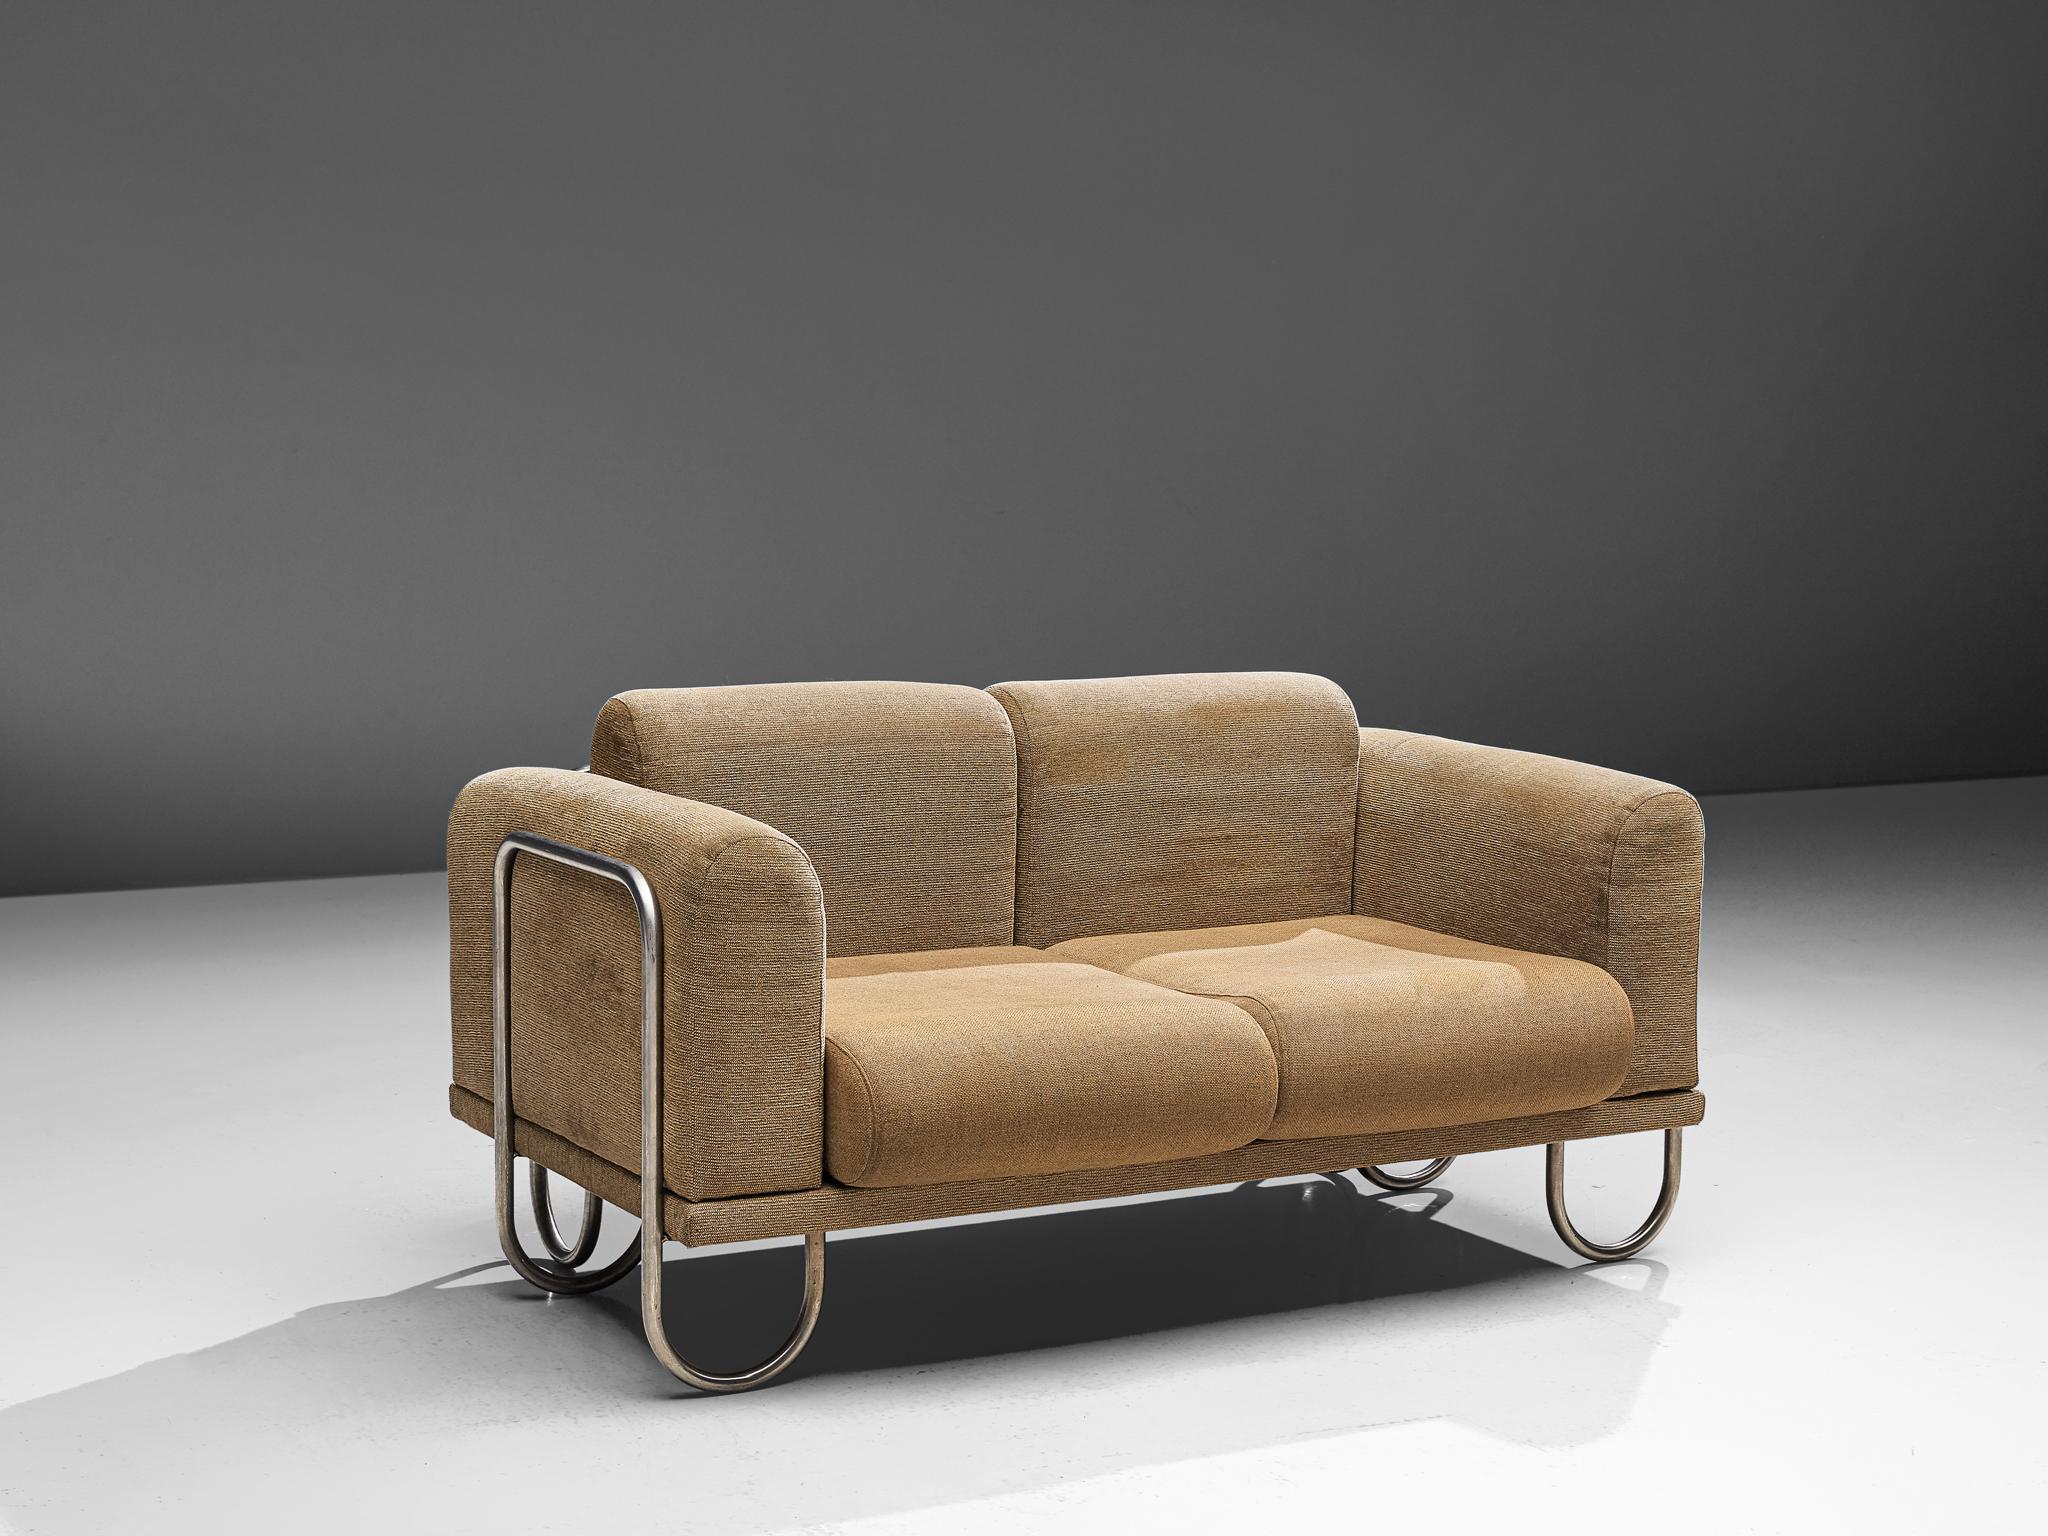 Sofa, fabric and metal, France, 1970s.

A comfortable sofa that features a curved, chromed tubular frame. The frame appears to be an on-going curved line, moving upwards to support the cushions and downwards, functioning as legs. The seat is shaped